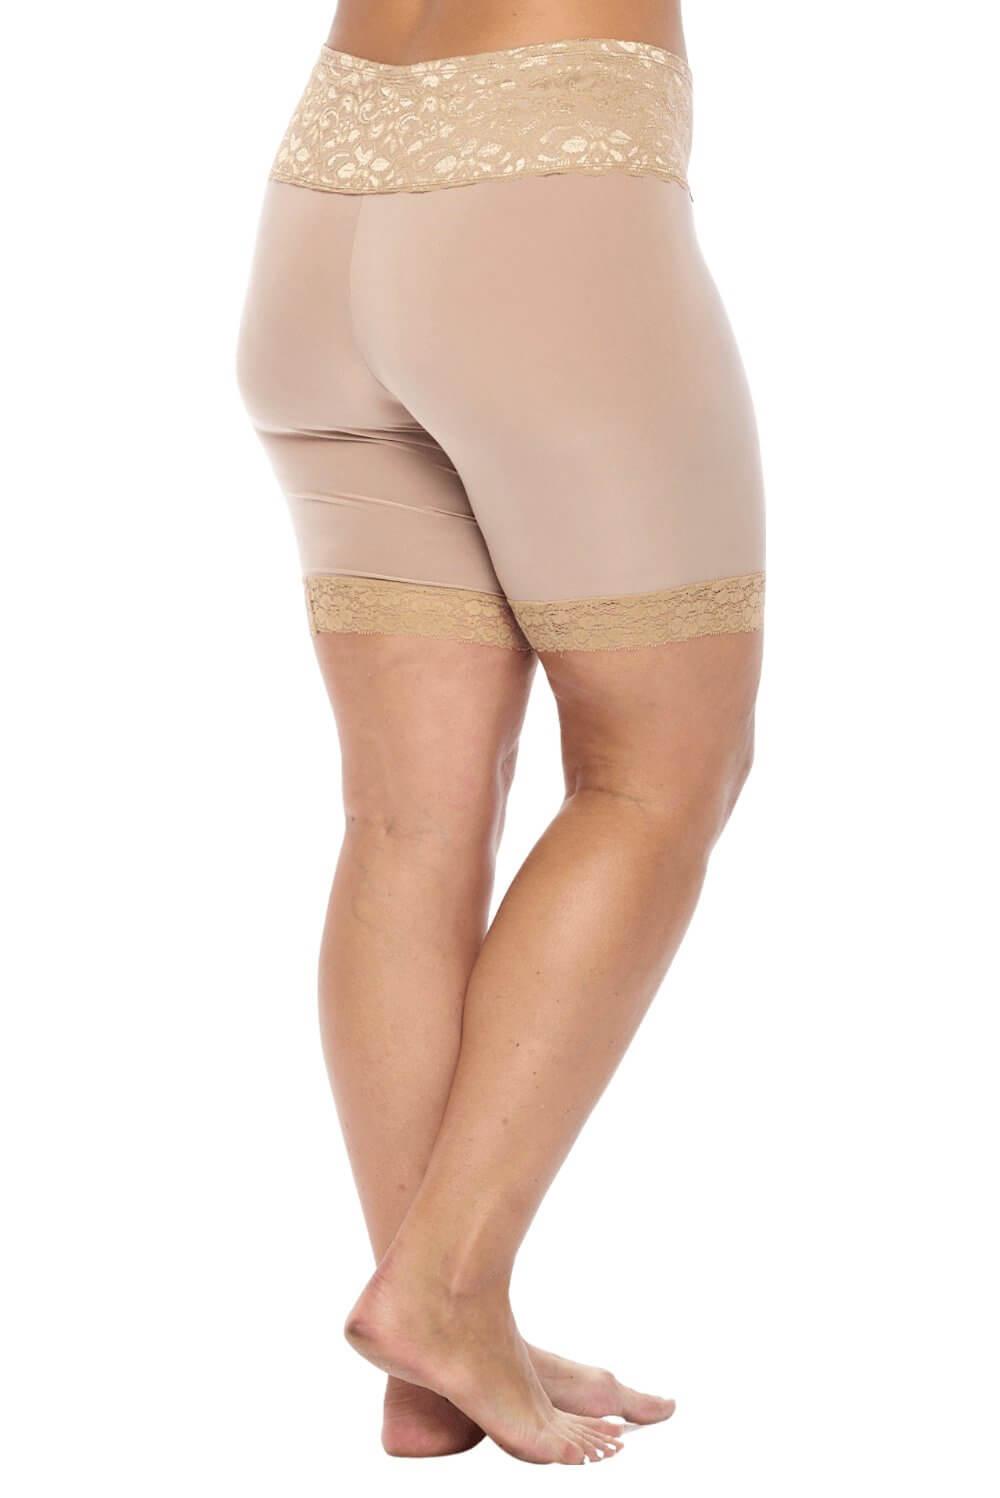 Undersummers Fusion Slip Shorts, Shortlette Thigh Anti Chafing Shorts  Women, Slip Shorts for Women Under Dress, 9” Inseam, Beige, Small :  : Clothing, Shoes & Accessories